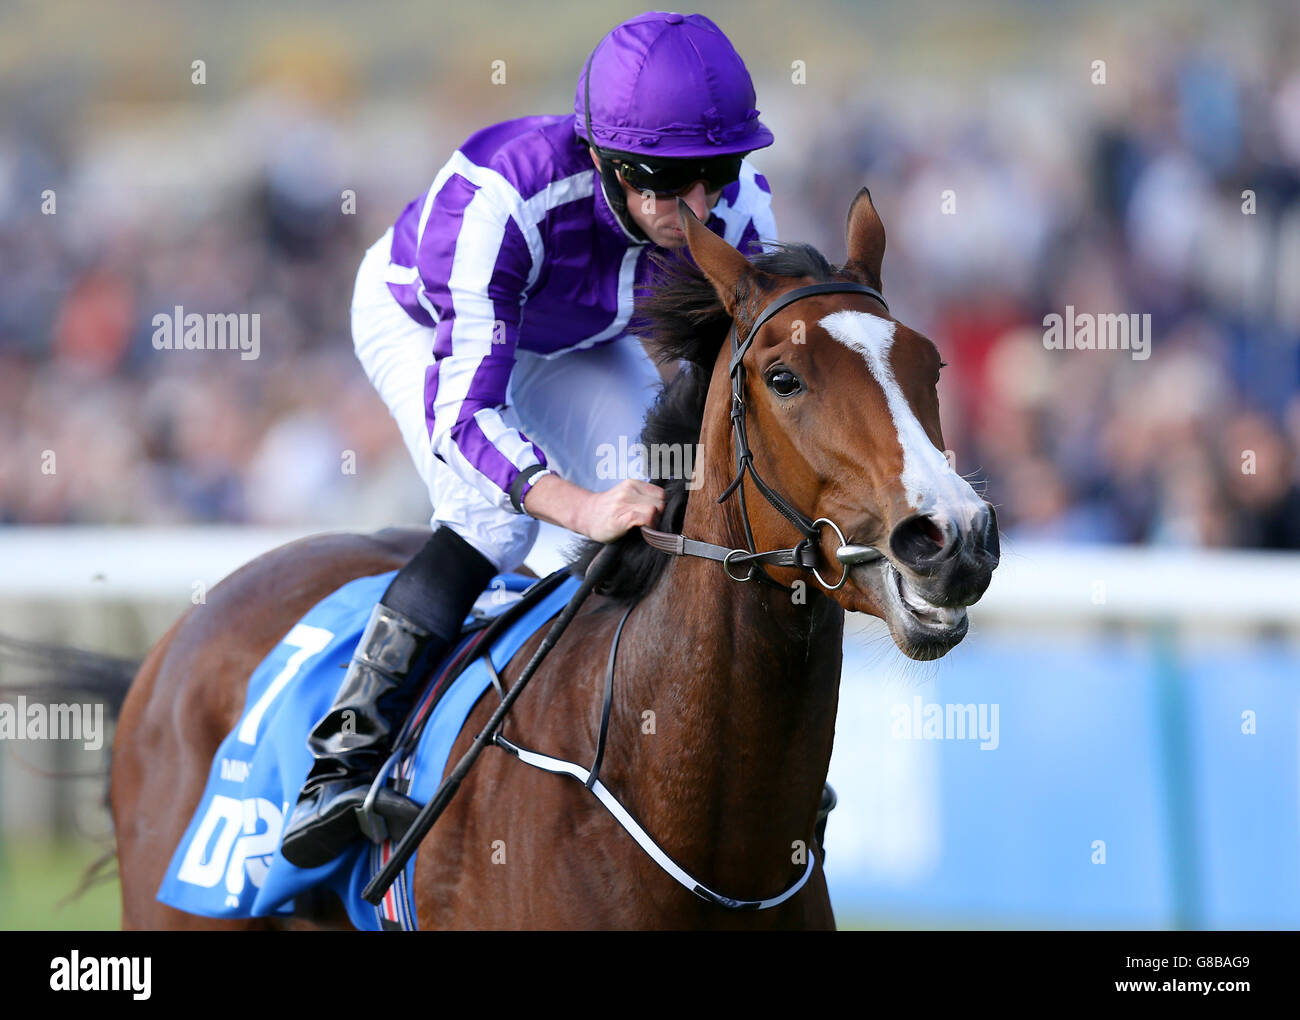 Horse Racing - Dubai Future Champions Festival - Day One - Newmarket Racecourse. Minding ridden by Ryan Moore wins The Dubai Filles Mile during day one of the Dubai Future Champions Festival at Newmarket Racecourse. Stock Photo